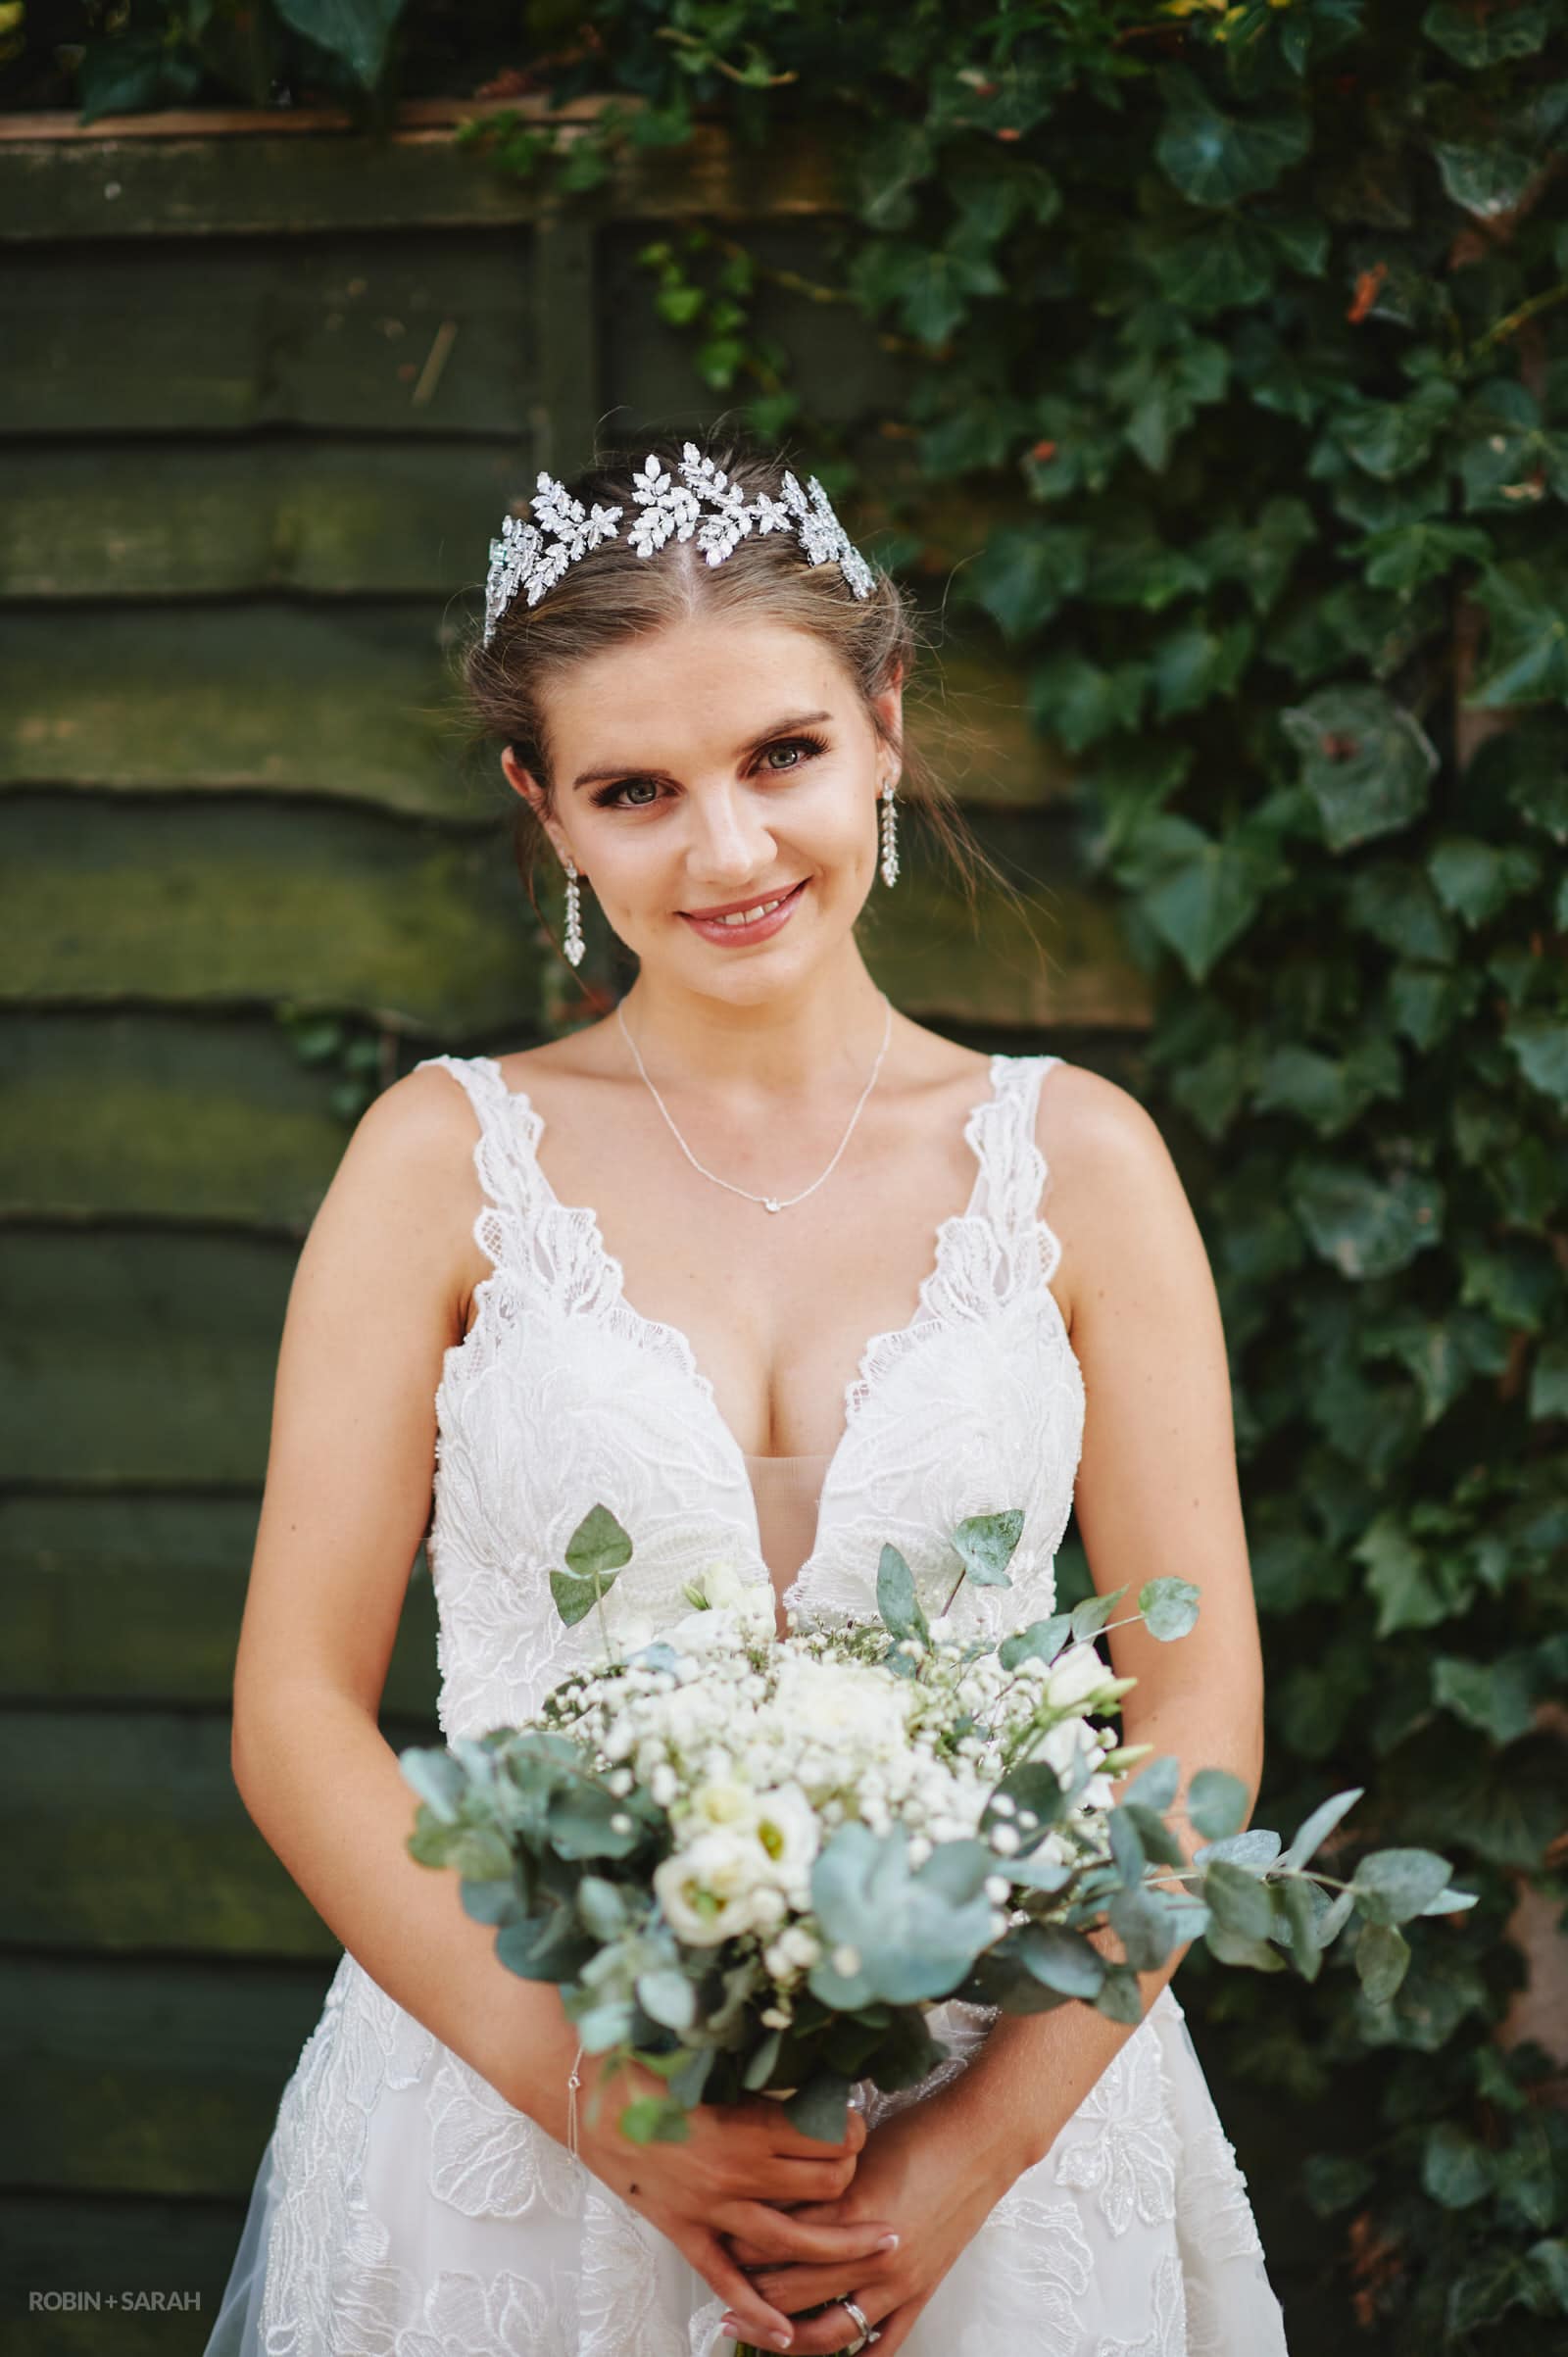 Portrait of bride in beautiful white wedding dress holding bouquet and wearing leaf tiara